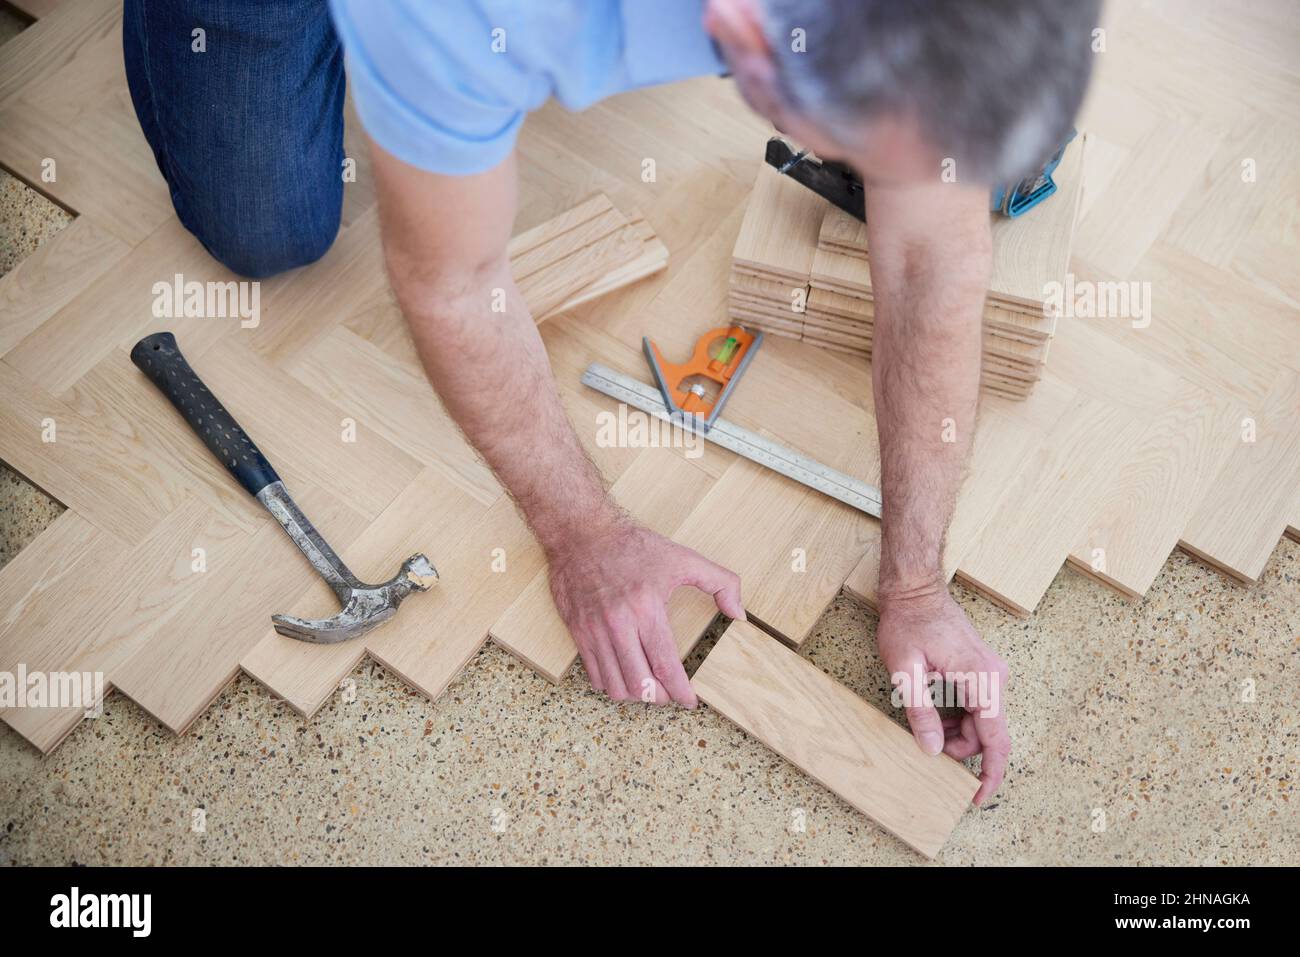 Overhead View Of Carpenter Or Builder Laying New Wood Block Parquet Parquet Floor In Kitchen At Home Stock Photo